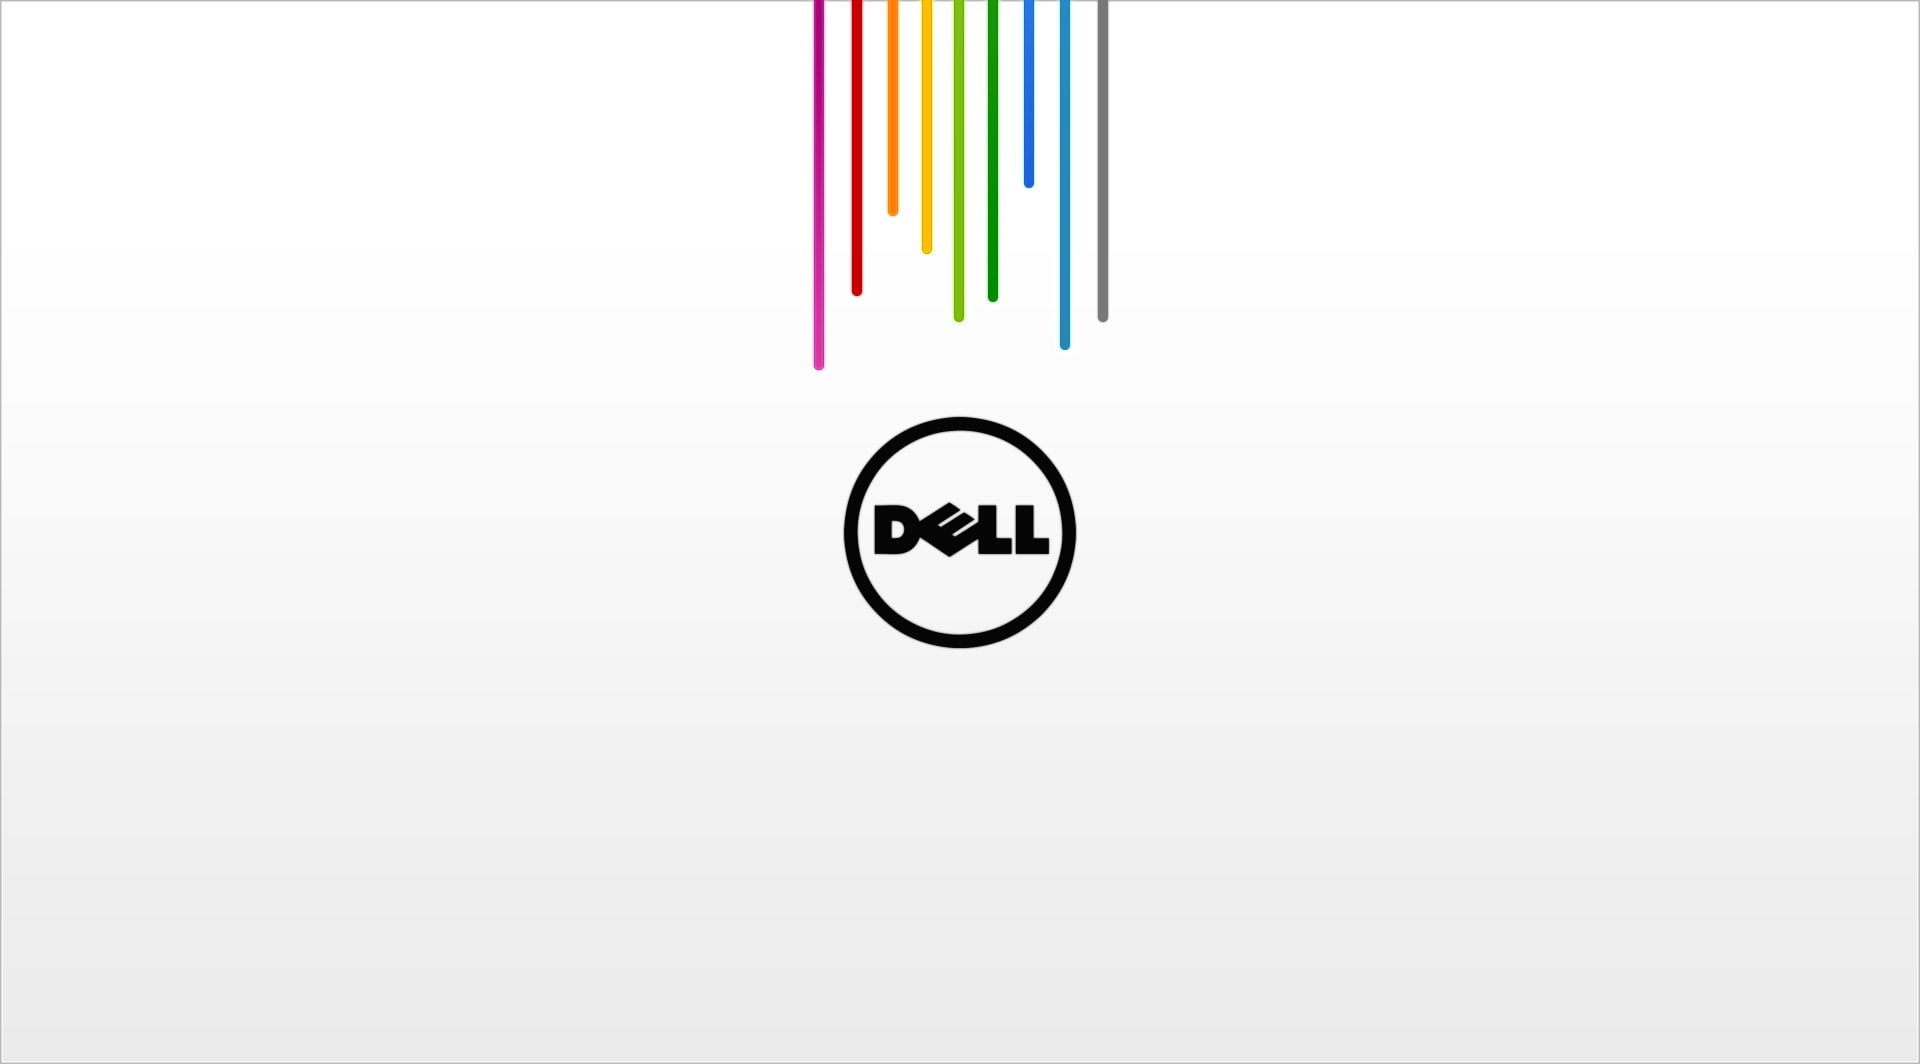 Technology, Dell